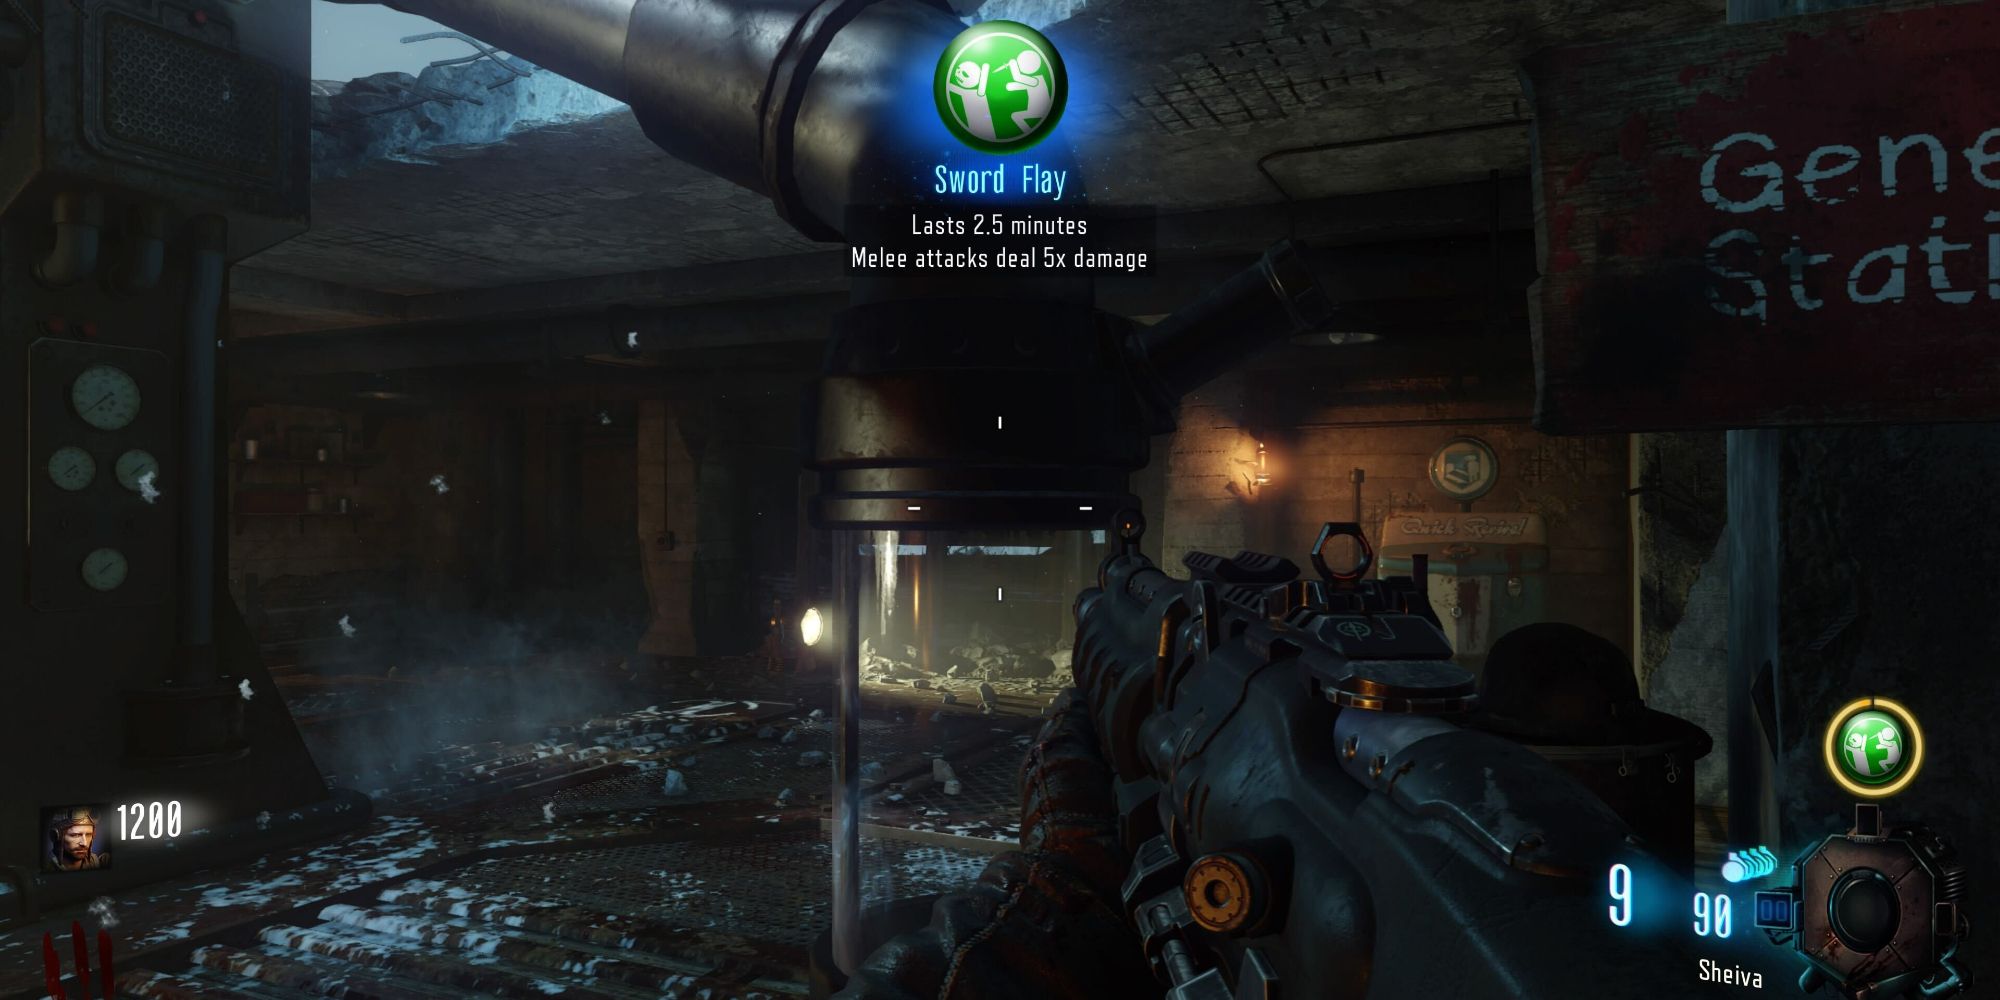 Gameplay from Call Of Duty: Black Ops Zombie mode, showing the player has used a Sword Flay Gobblegum